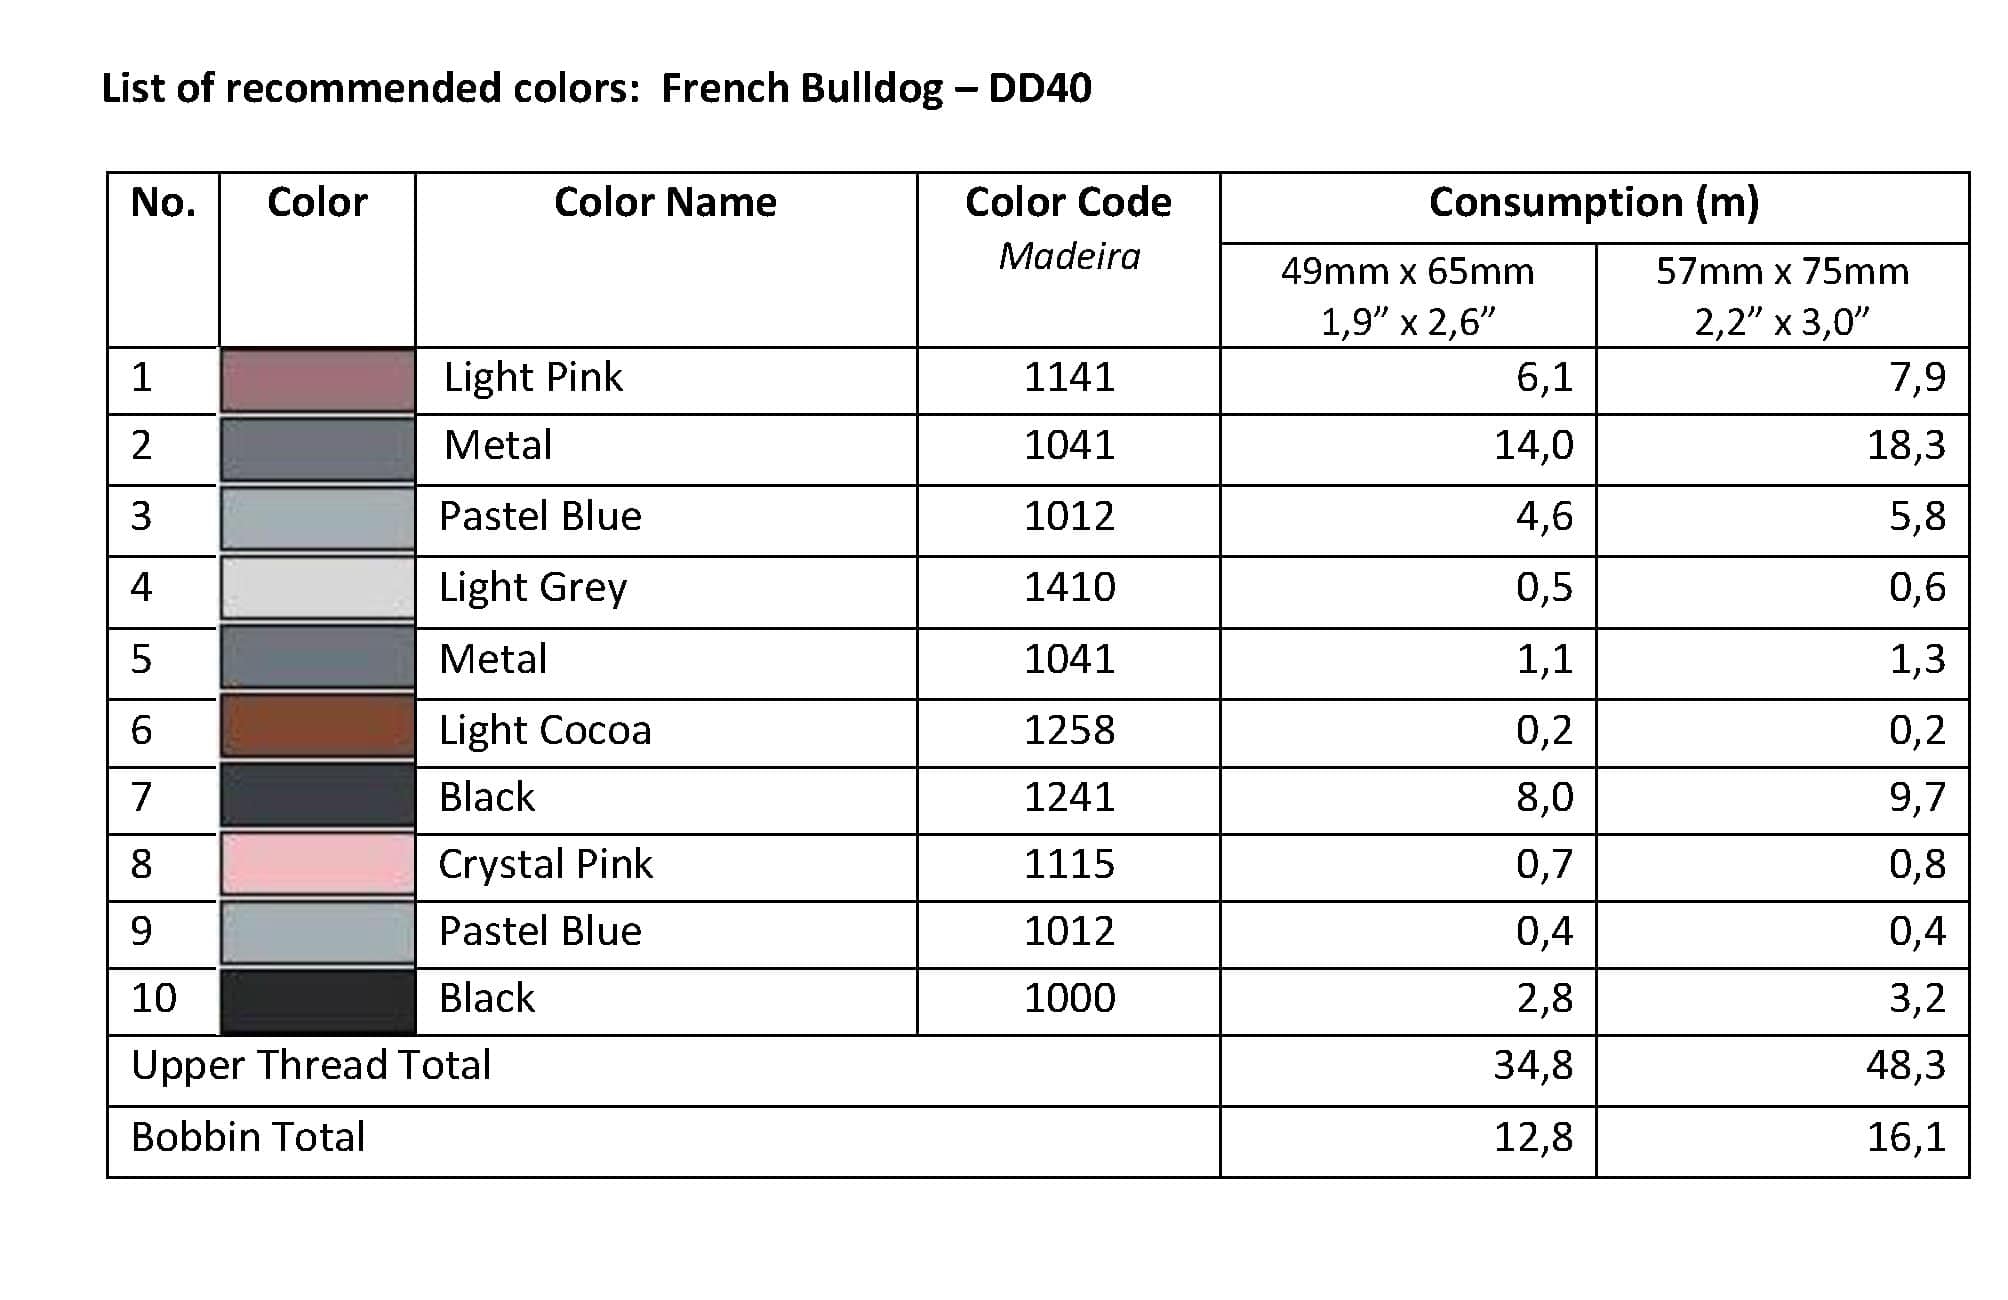 List of Recommended Colors - French Bulldog DD40